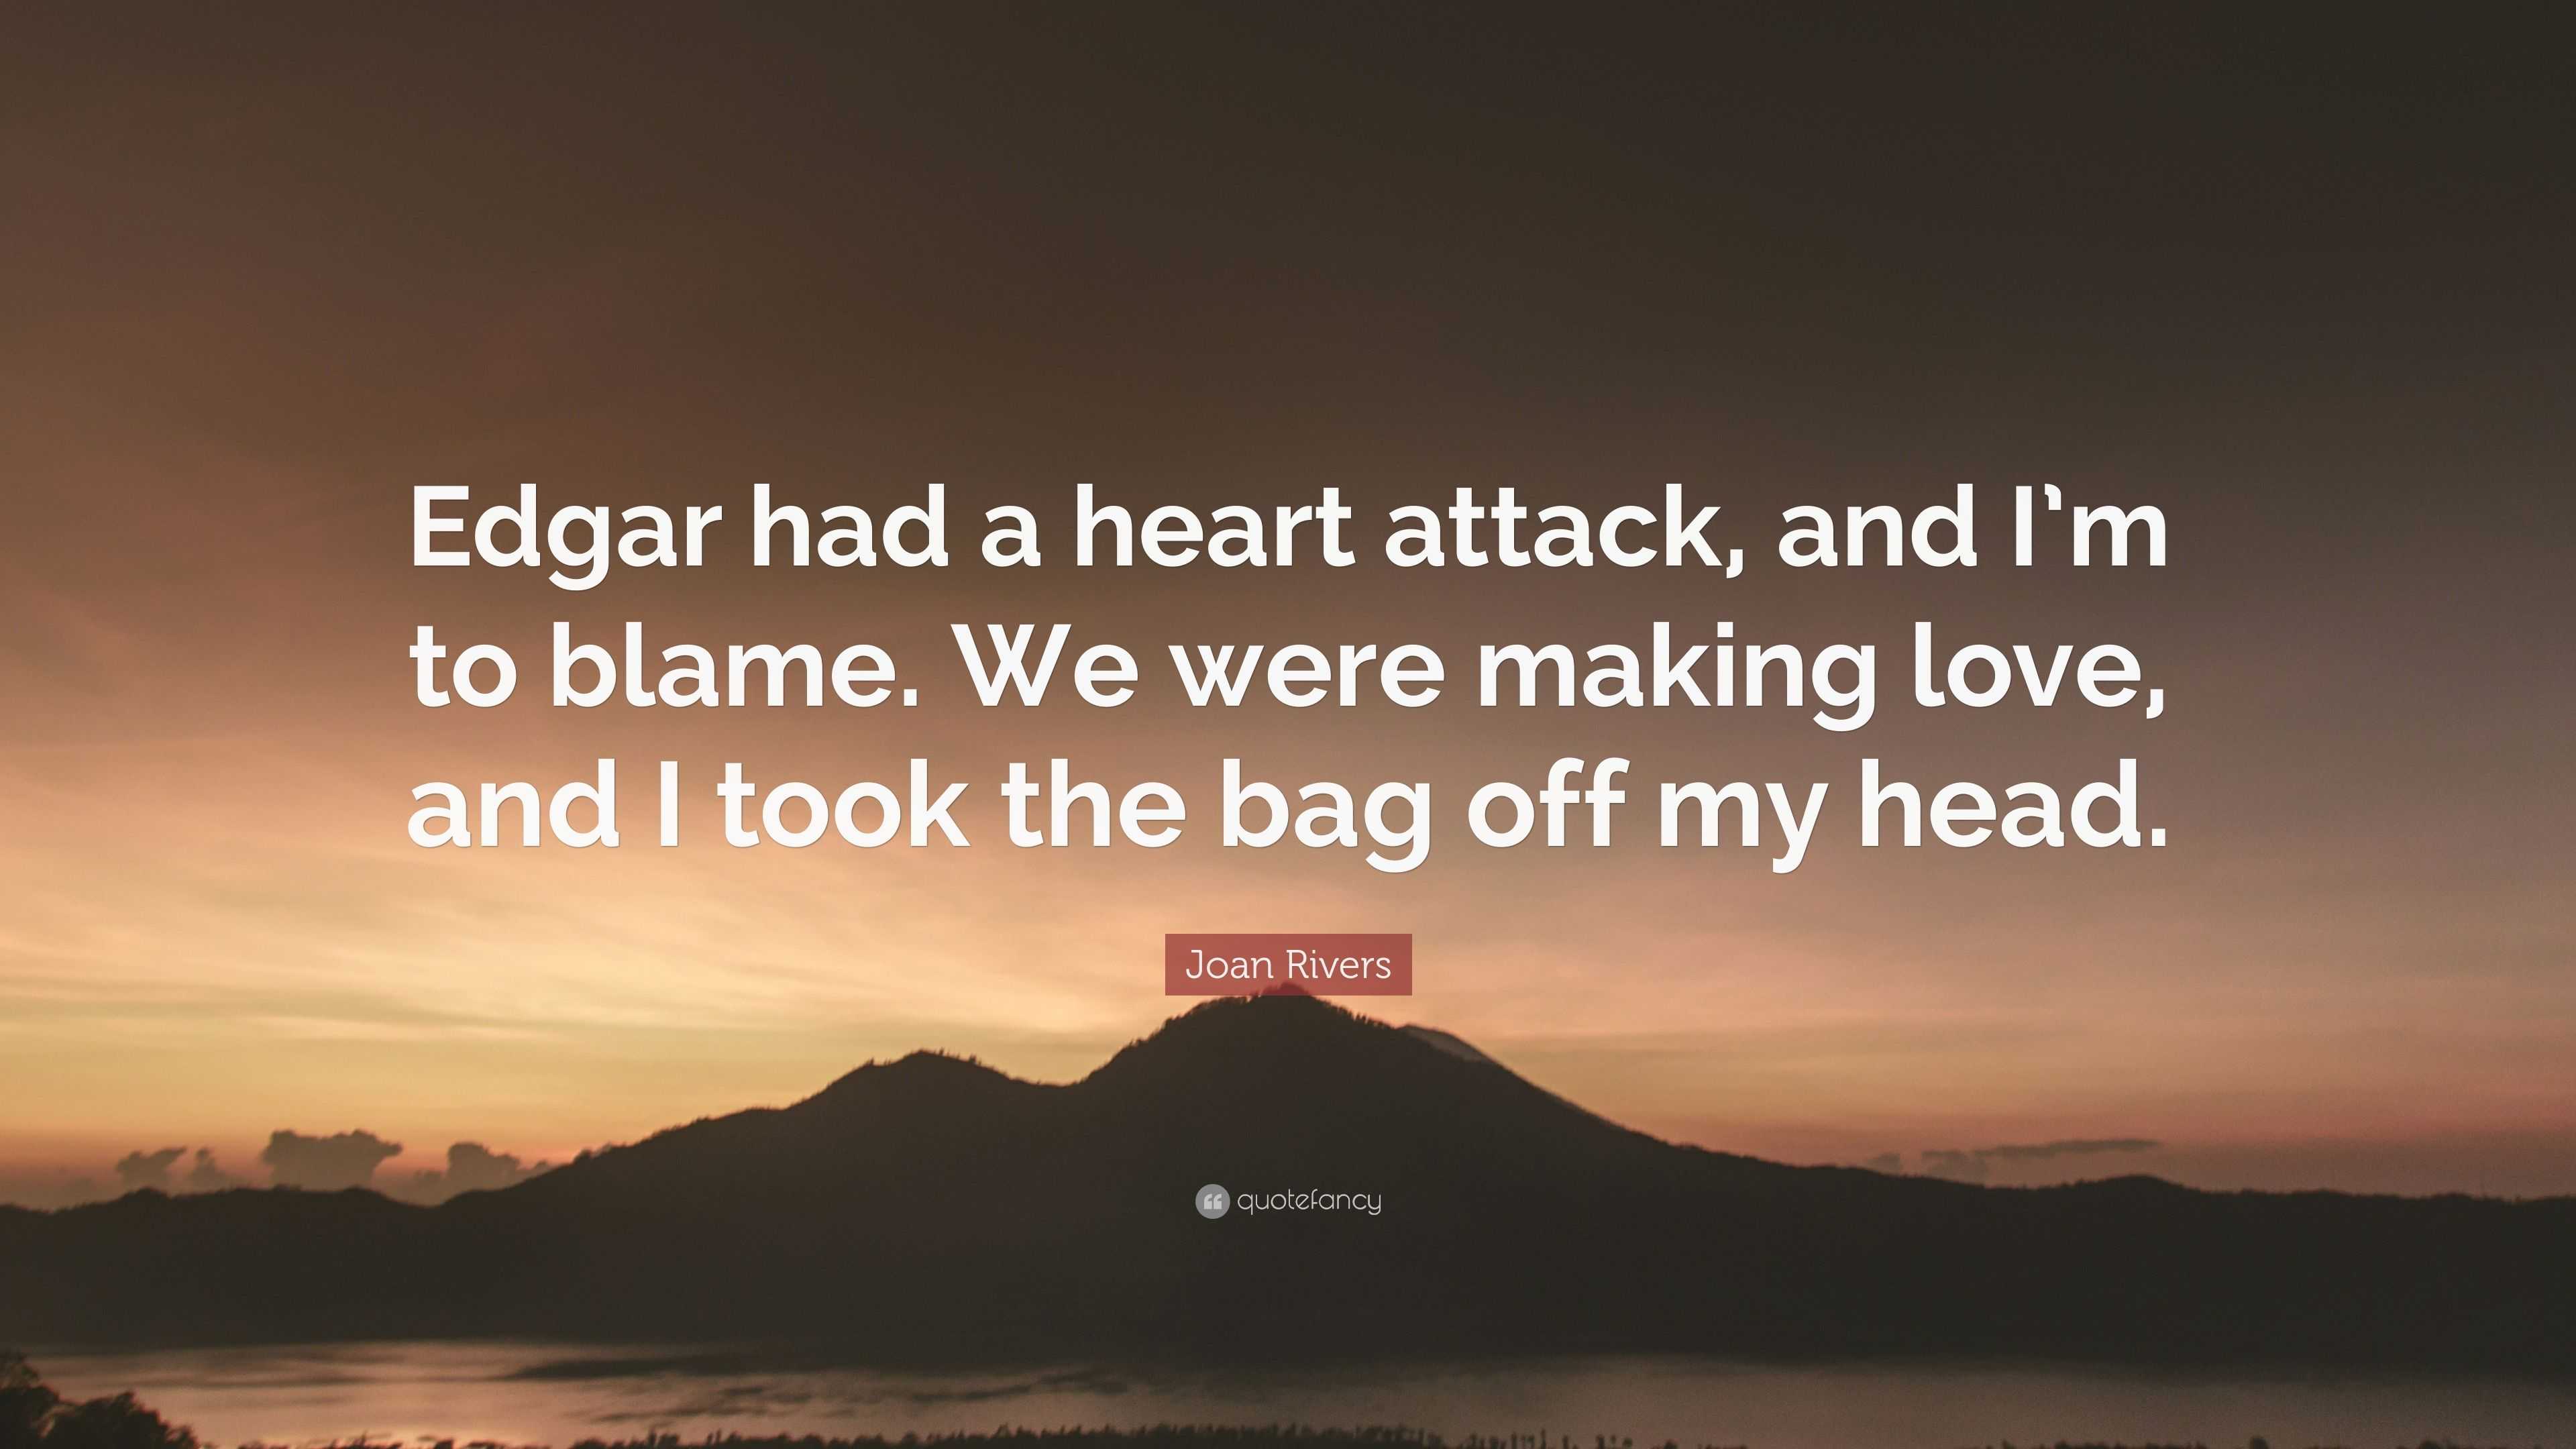 Joan Rivers Quote “Edgar had a heart and I m to